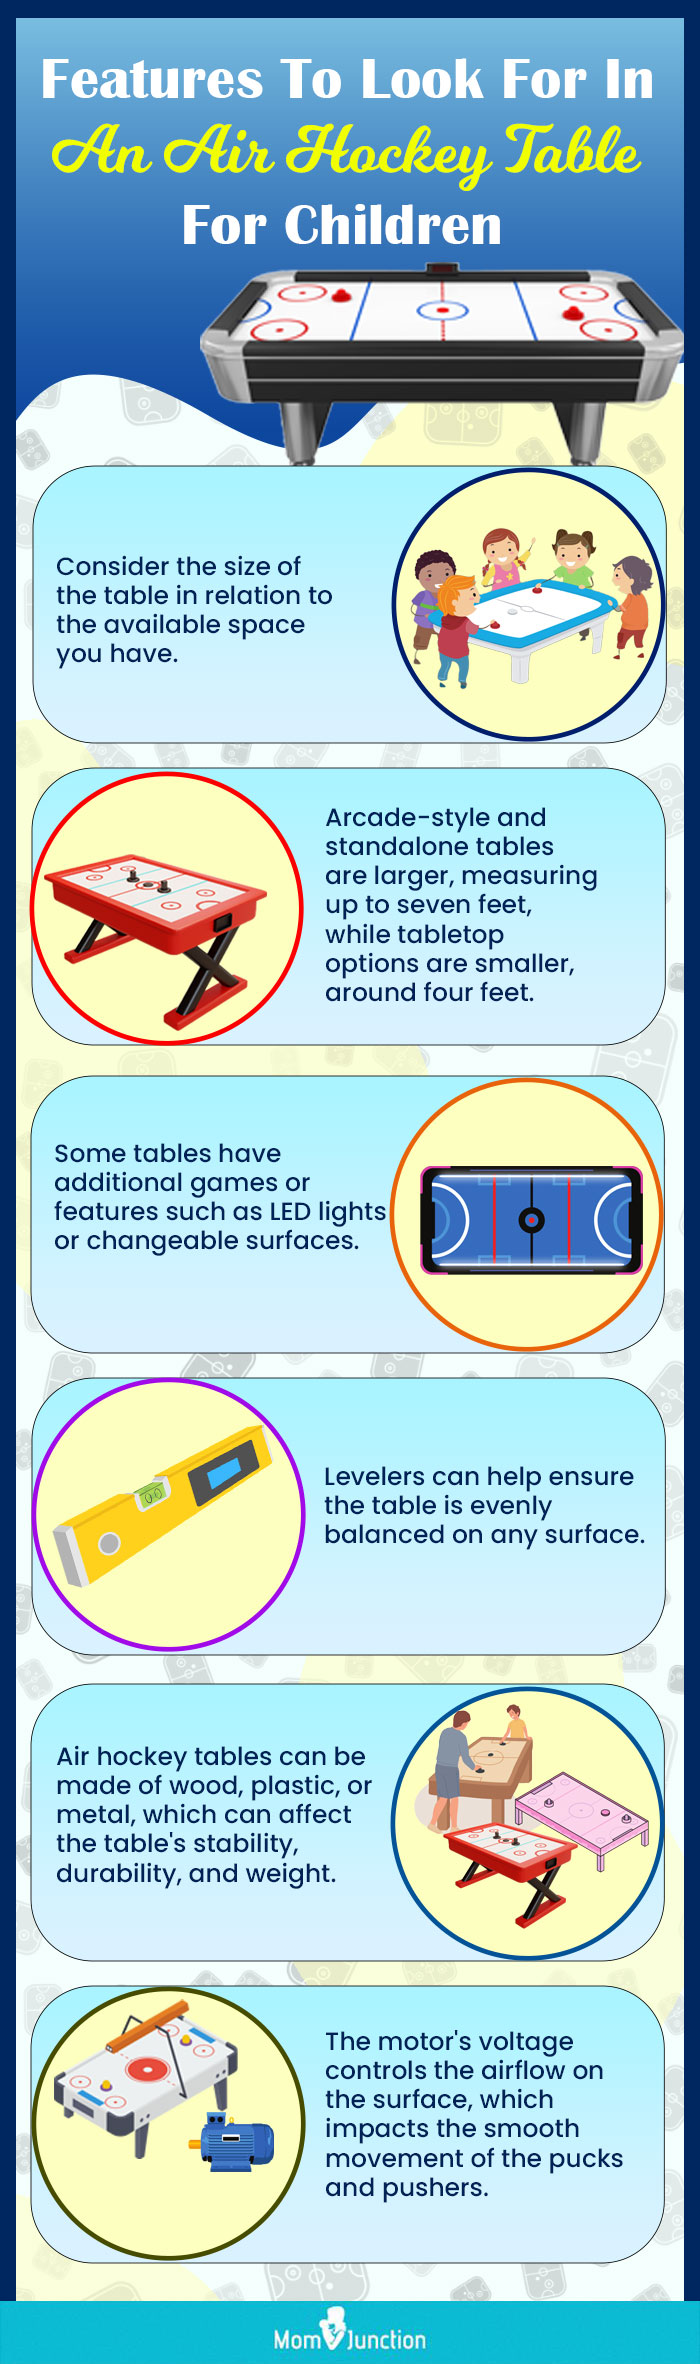 Features-To-Look-For-In-An-Air-Hockey-Table-For-Children [infographic]